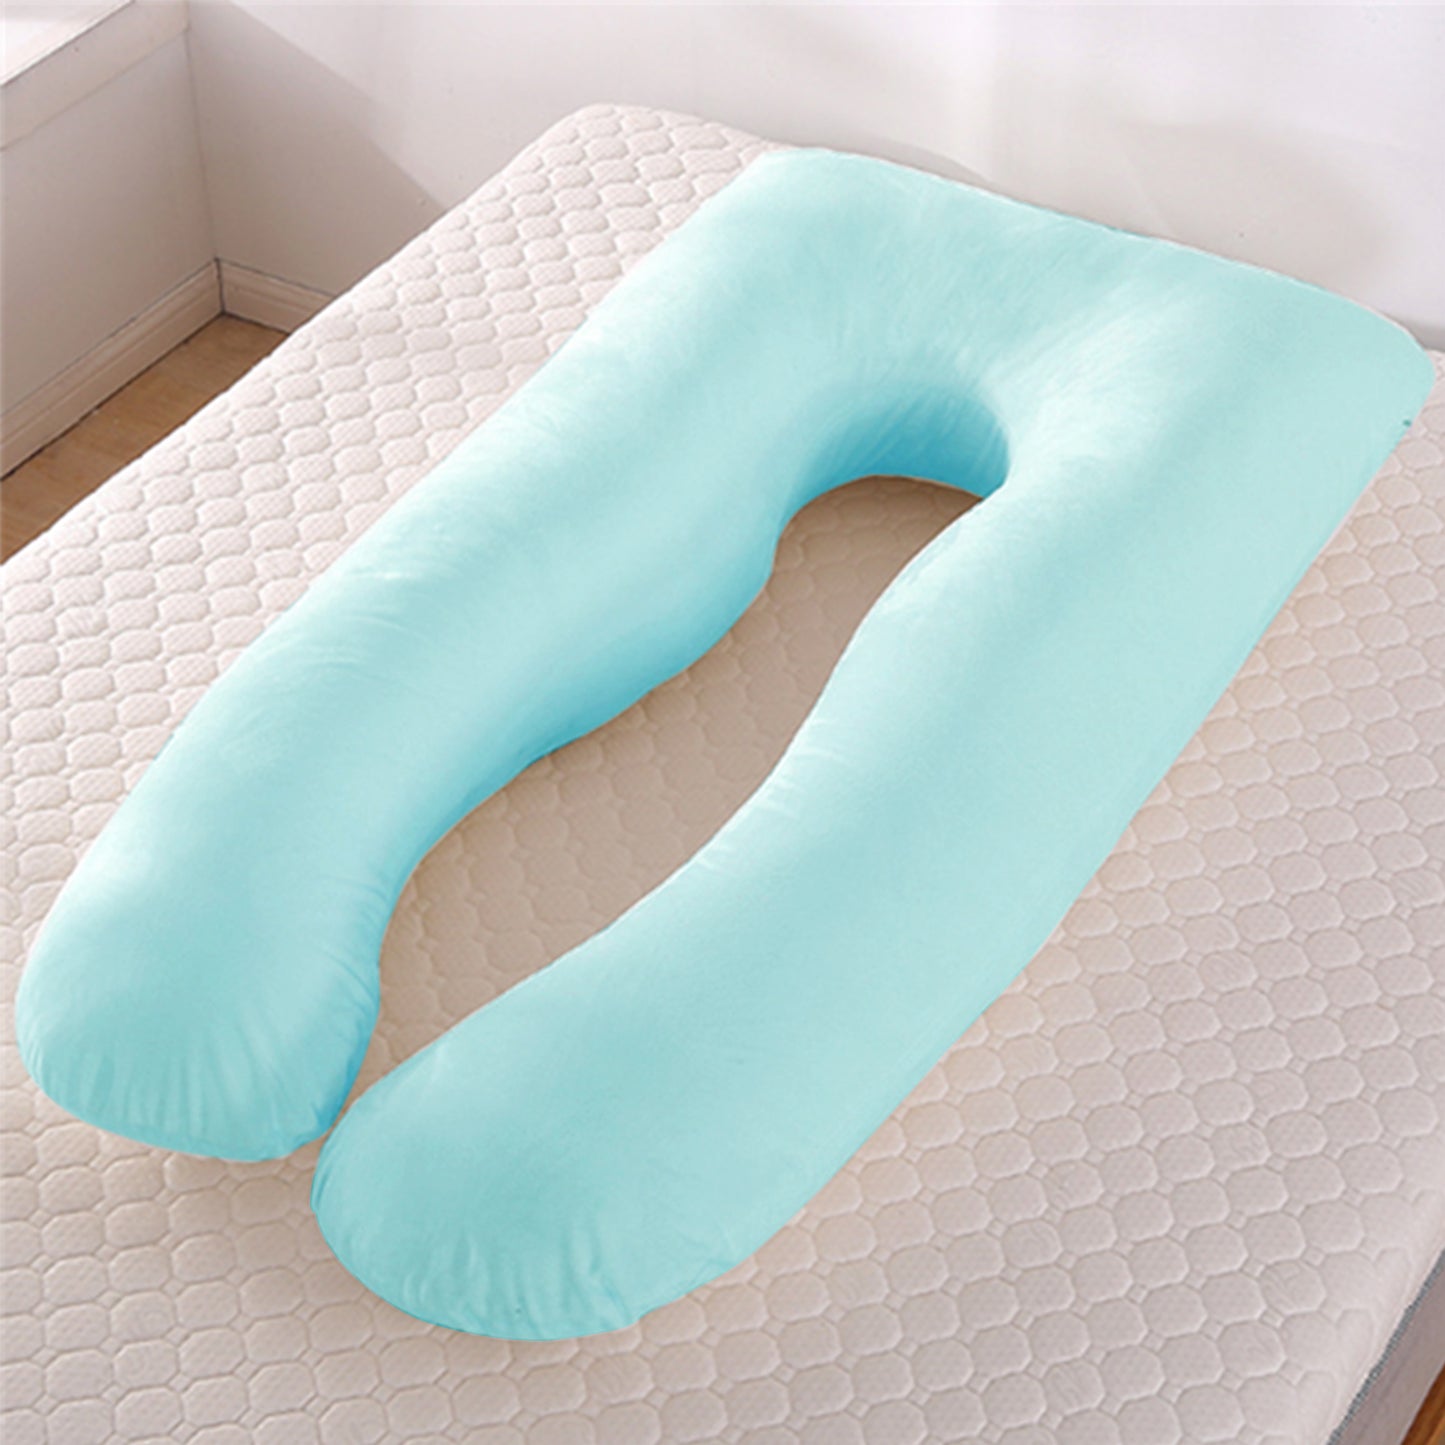 U-Shaped Pregnancy Pillow - A Must-Have for Expectant Mothers